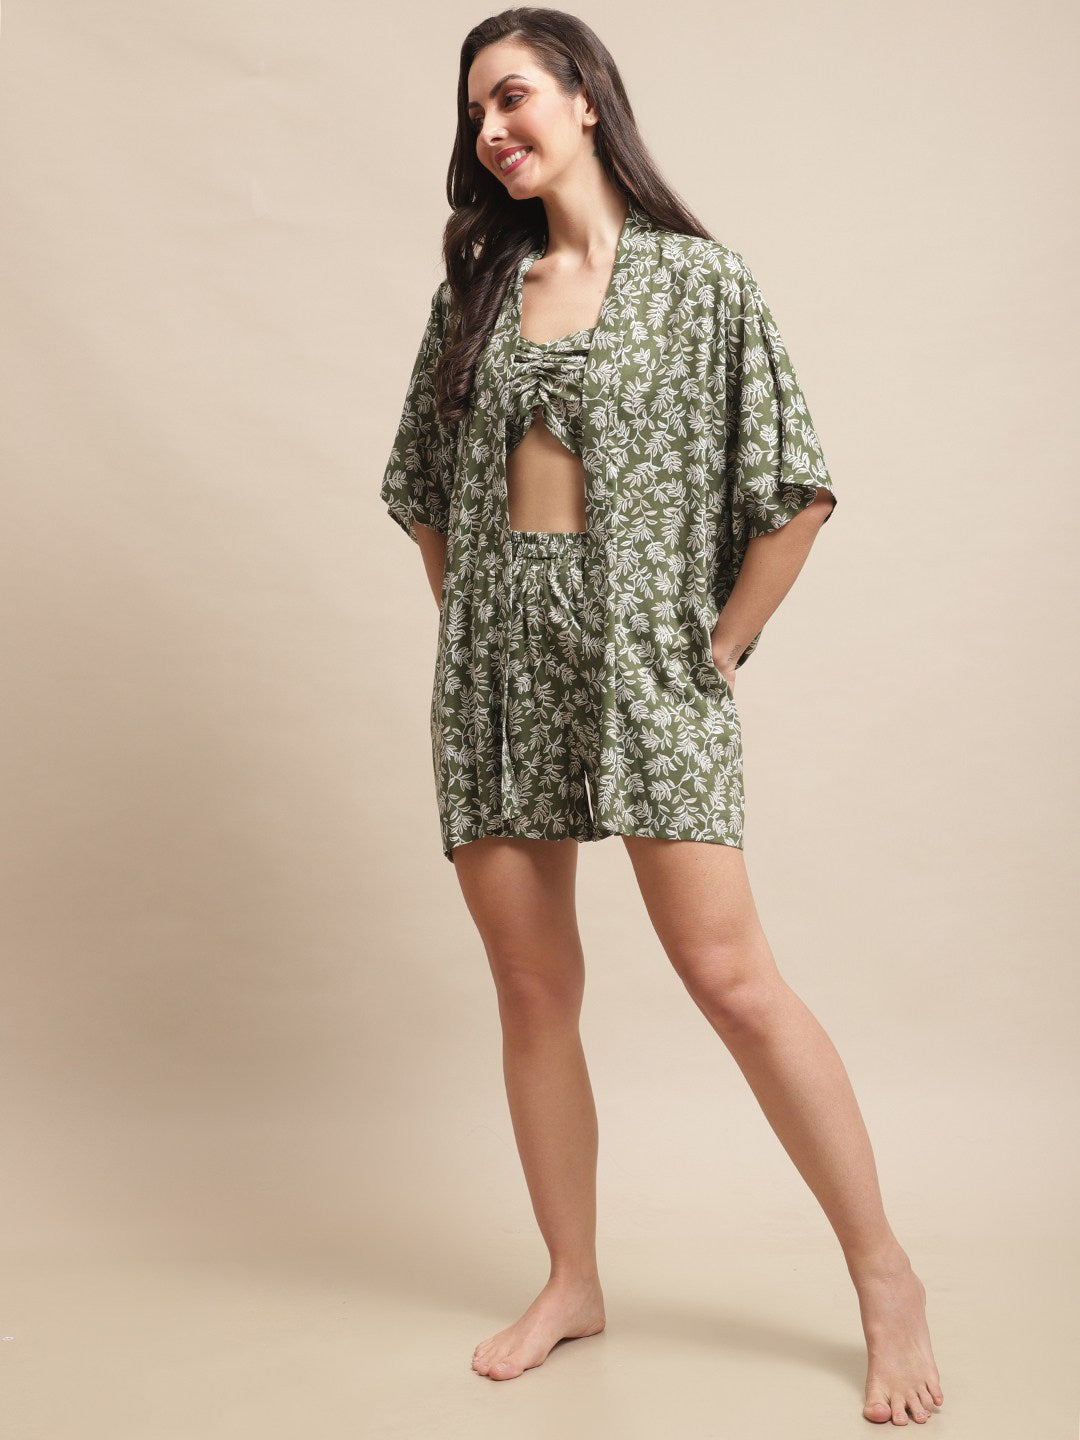 Green Color Floral Printed Viscose Rayon 3 pcs Coverup Set With Robe Beachwear For Woman Claura Designs Pvt. Ltd. Beachwear Beachwear, Beachwear_size, Coverup, Floral, Green, Printed, Rayon, Swimwear